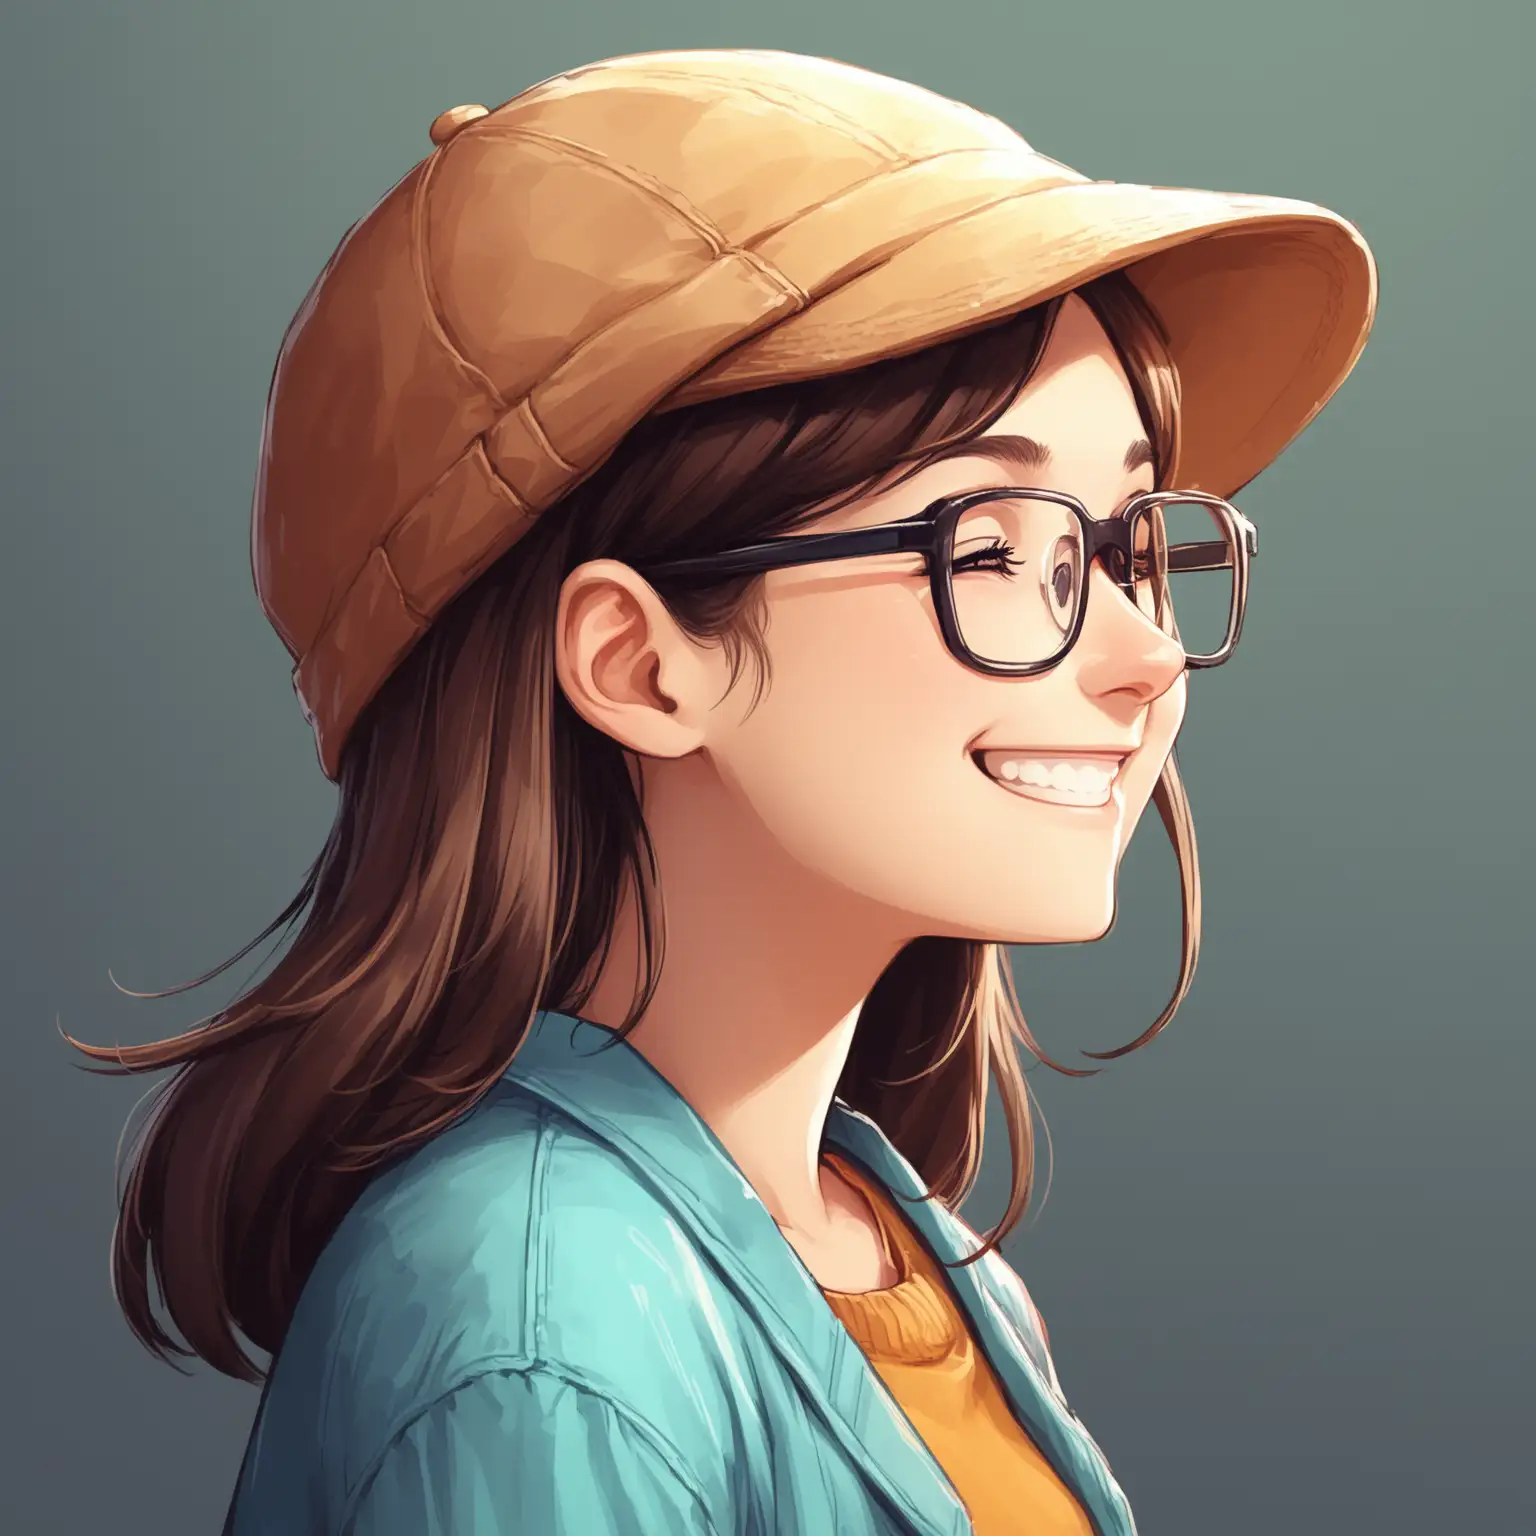 a girl, wearing glasses, cheerful disposition, smiling, wearing a hat, feeling like a programmer, profile